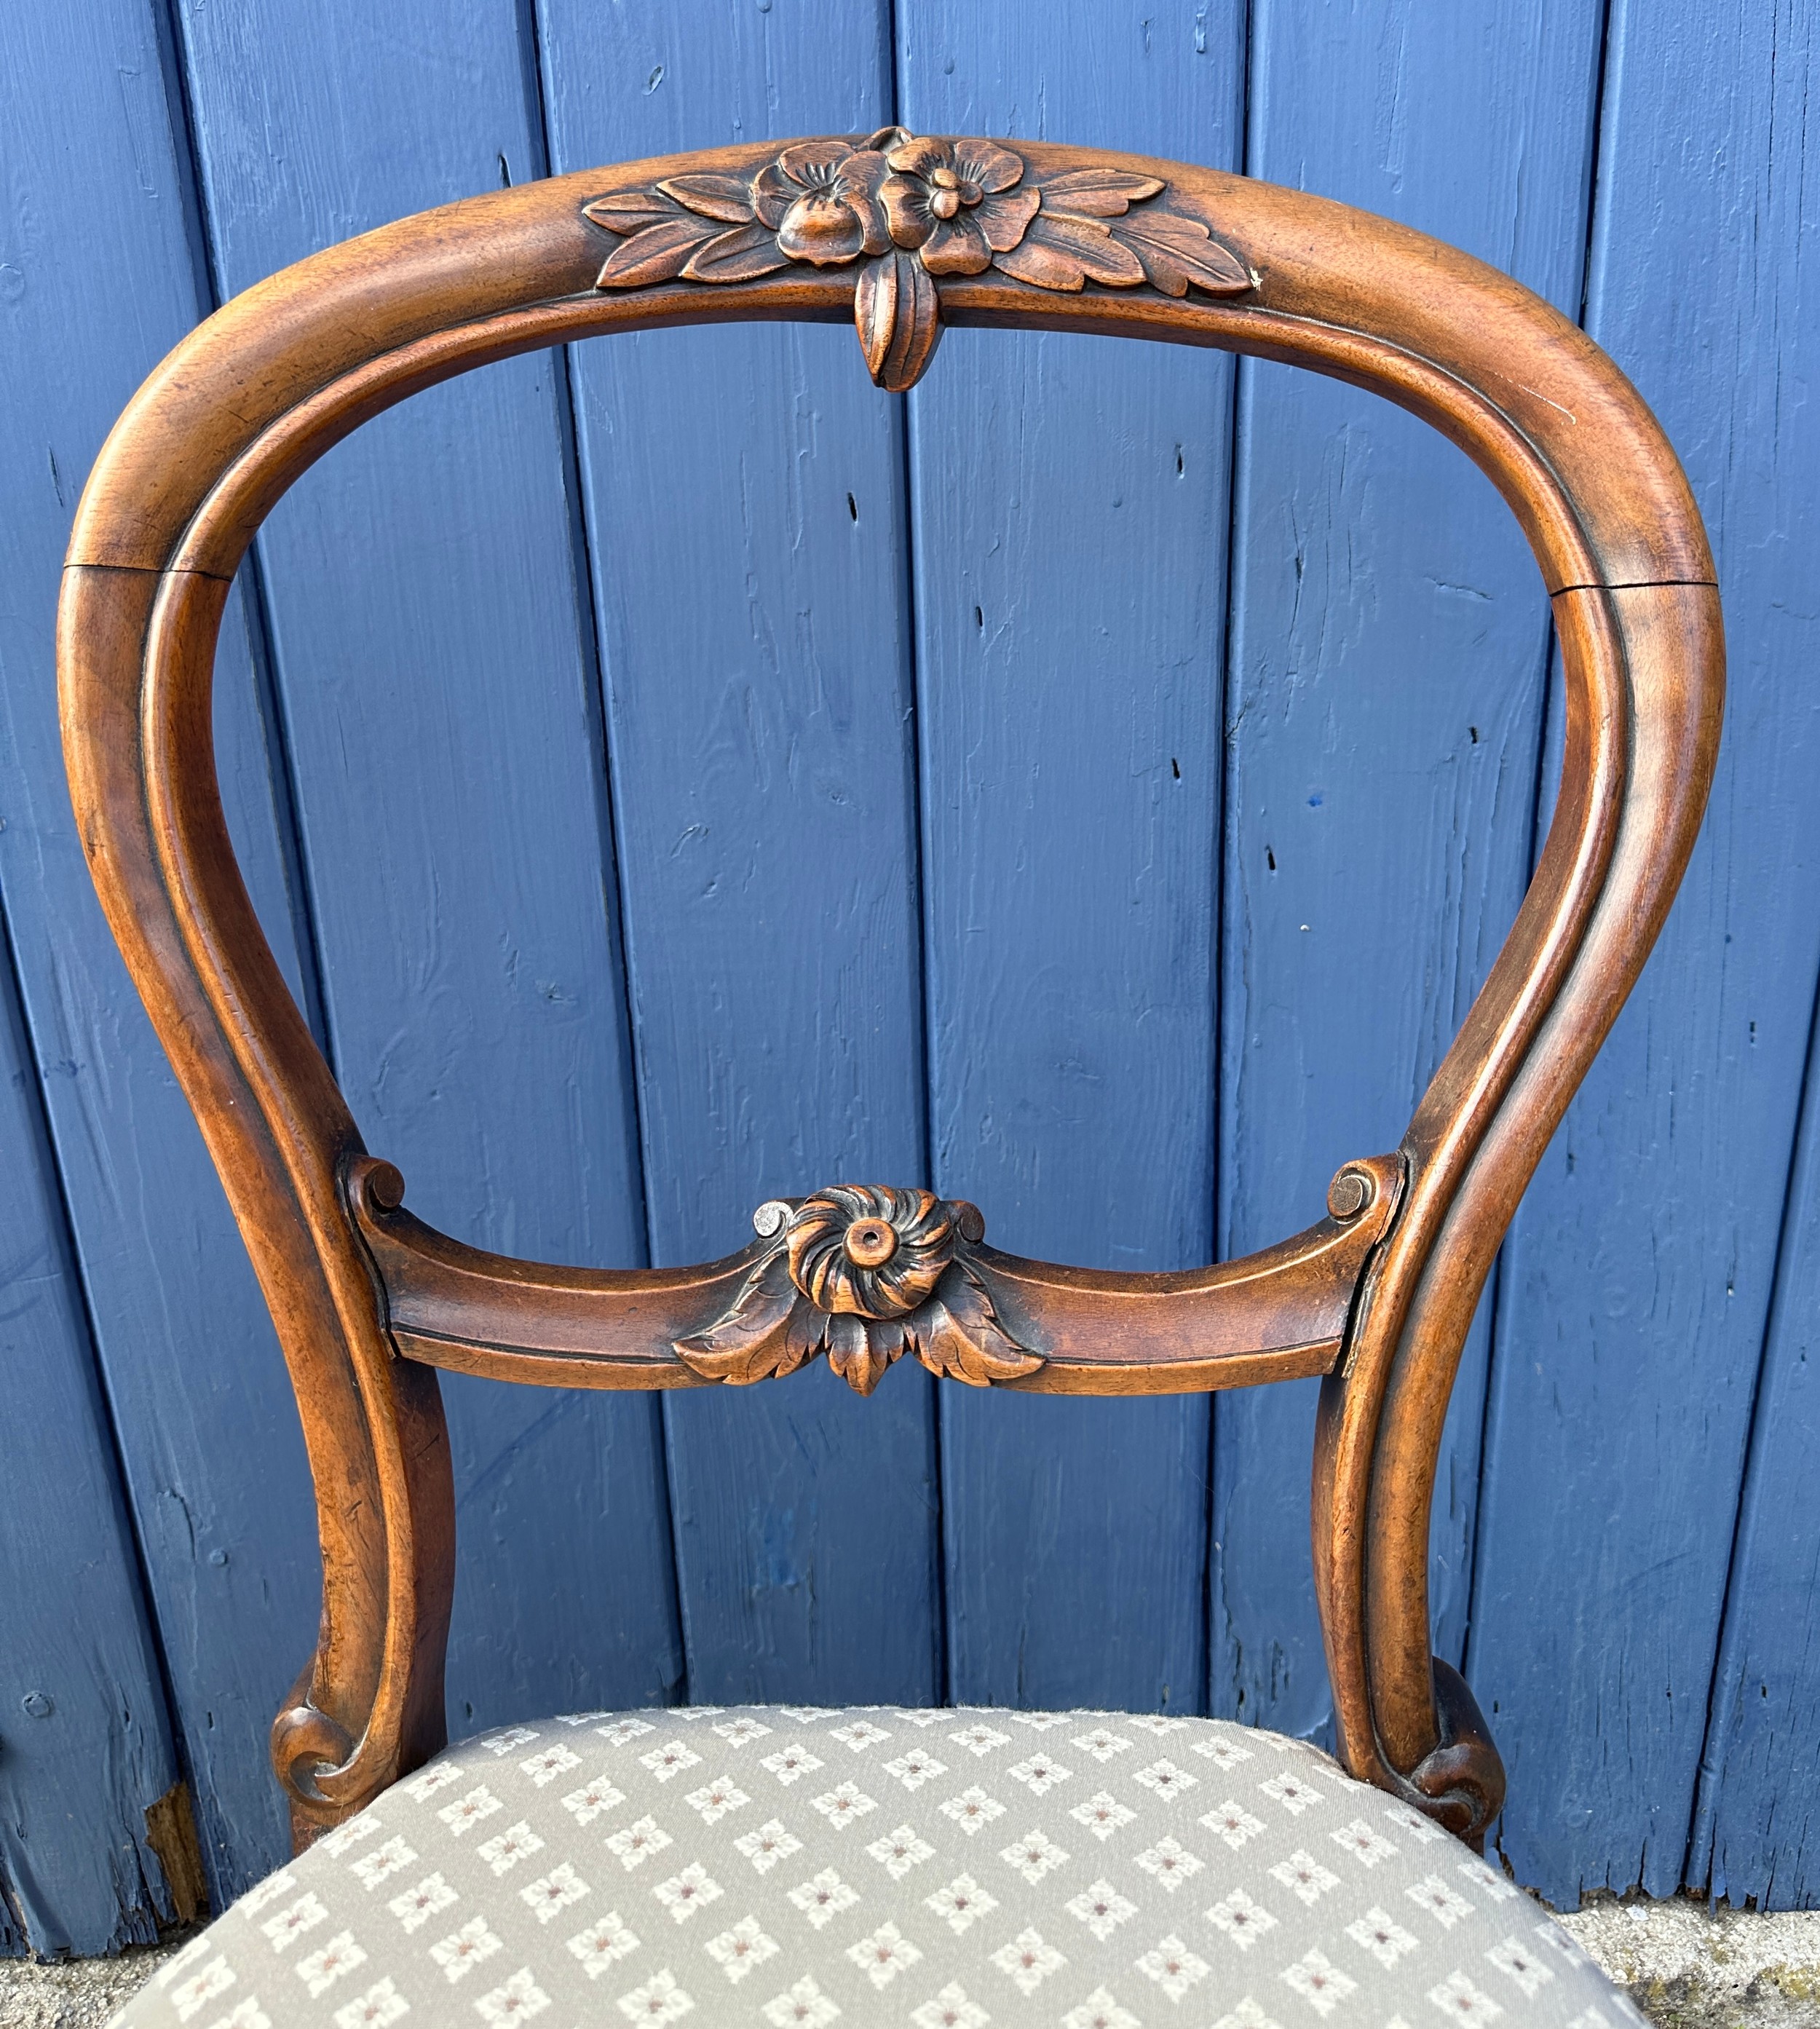 Pair of Victorian mahogany balloon back dining chairs 84cm h approx 46cm to seat. - Image 2 of 6